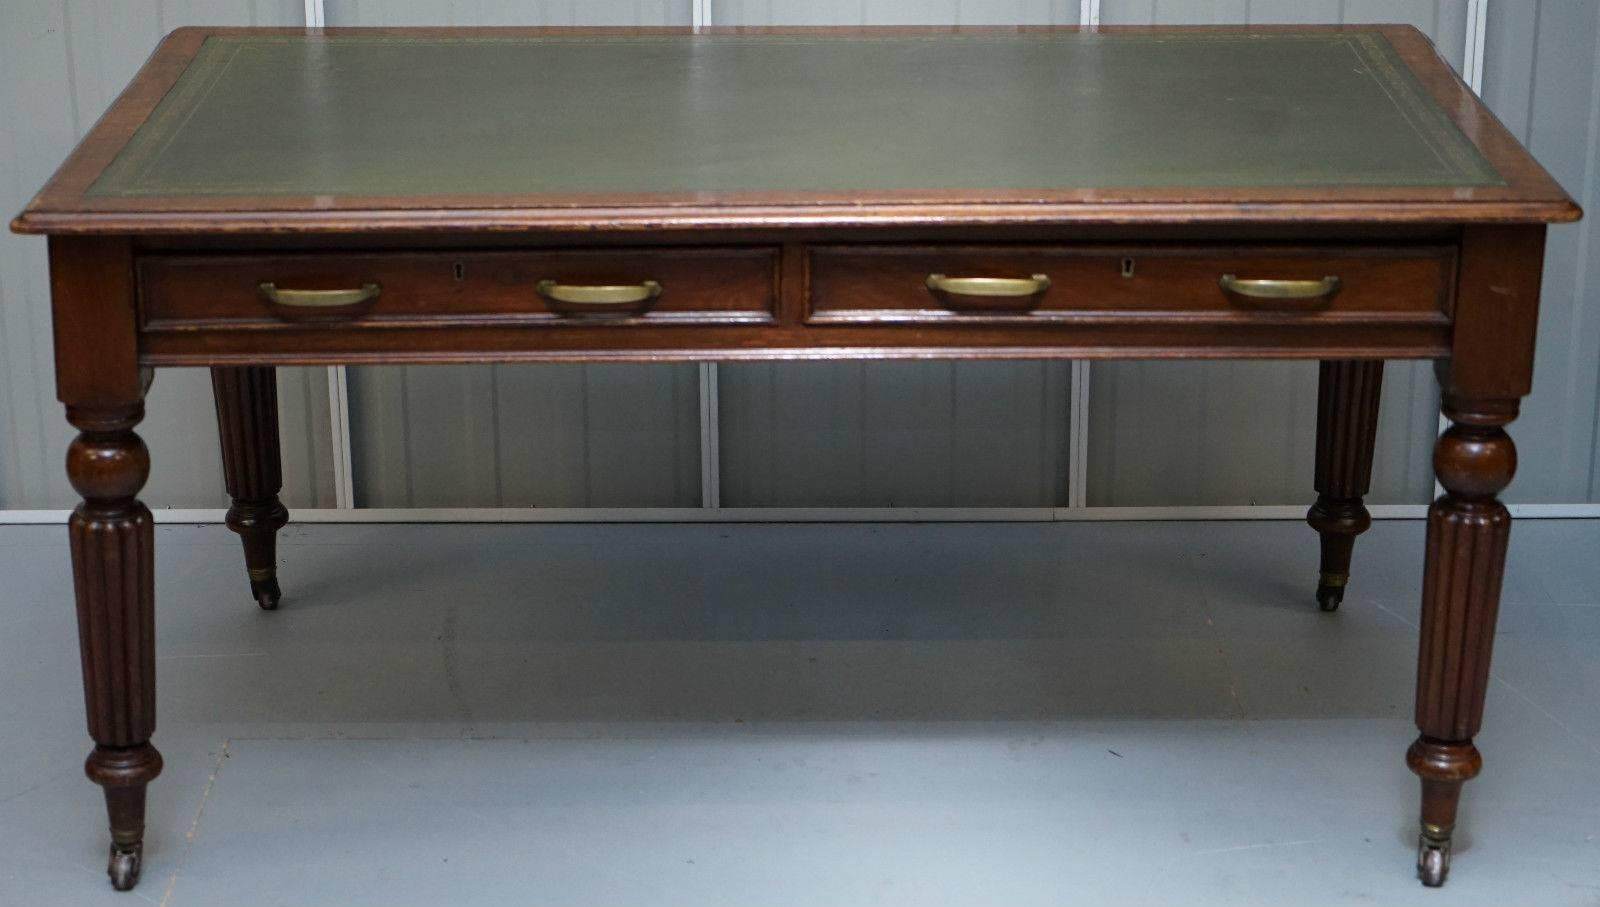 Antique & Vintage furniture Wimbledon

We are delighted to offer for sale this lovely antique Walnut Gillows writing table partner desk with leather writing surface

Please note the delivery fee listed is just a guide, for an accurate quote please